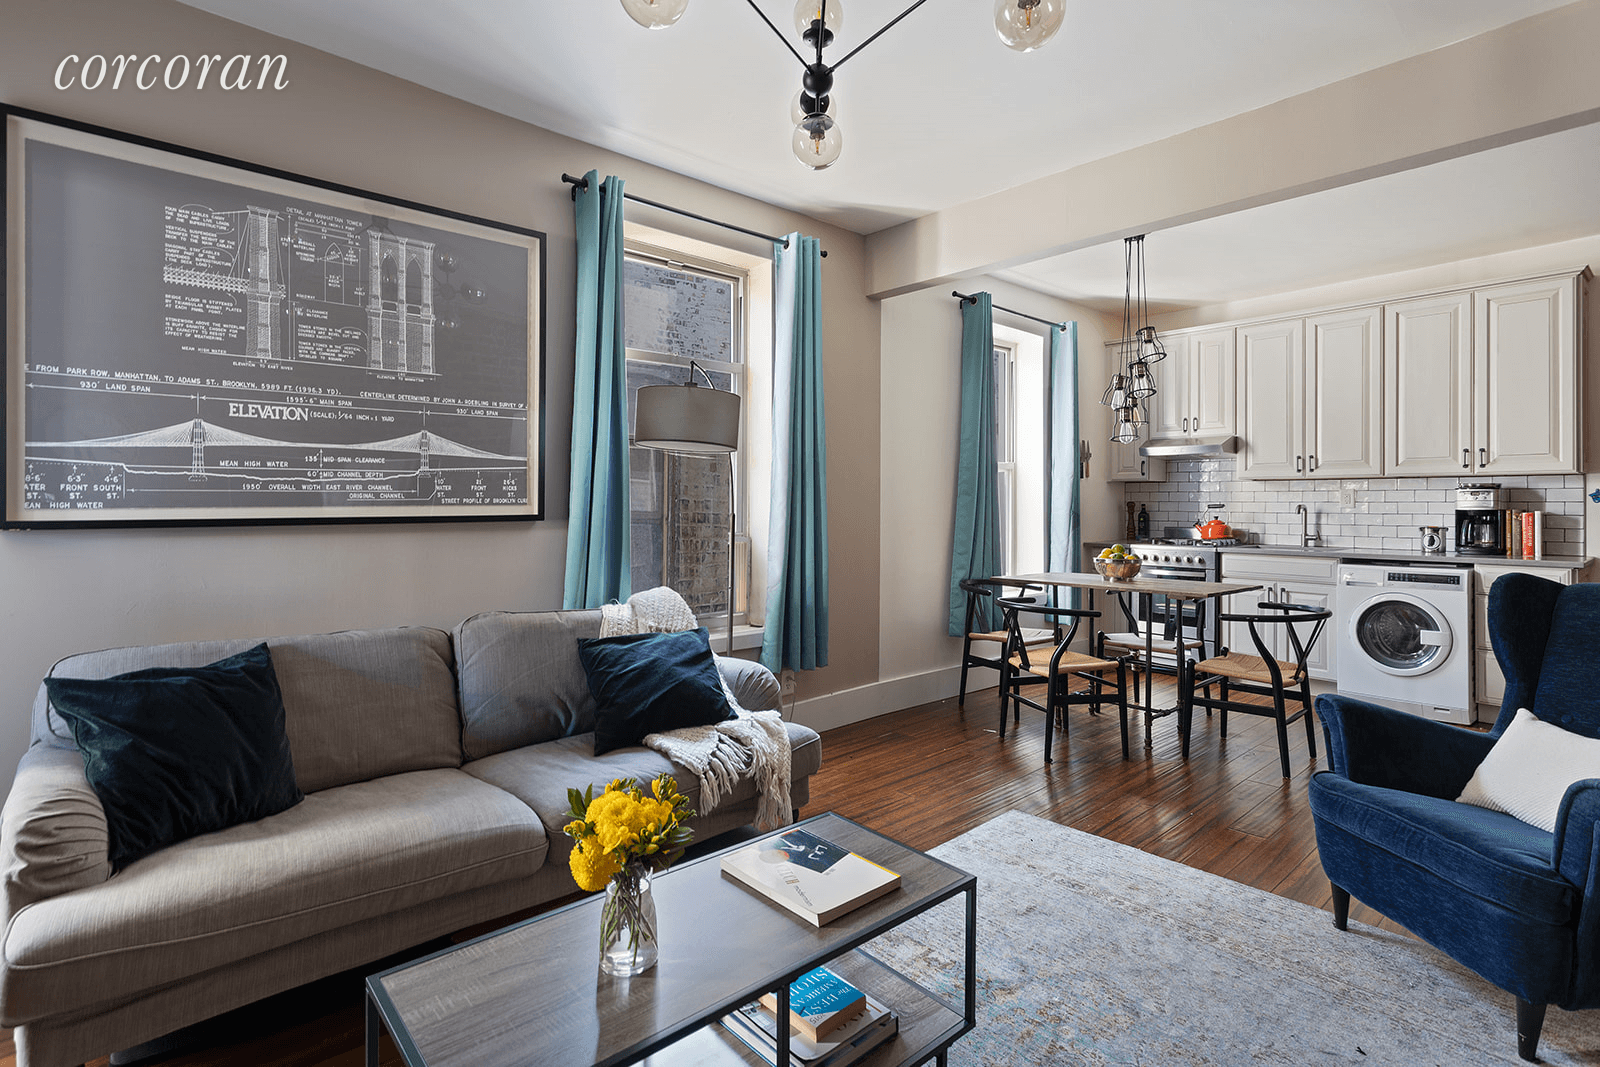 411 15th Street, Apartment PRecently renovated, this bright and stylish open living plan one bedroom apartment is ideally located one block from Prospect Park.